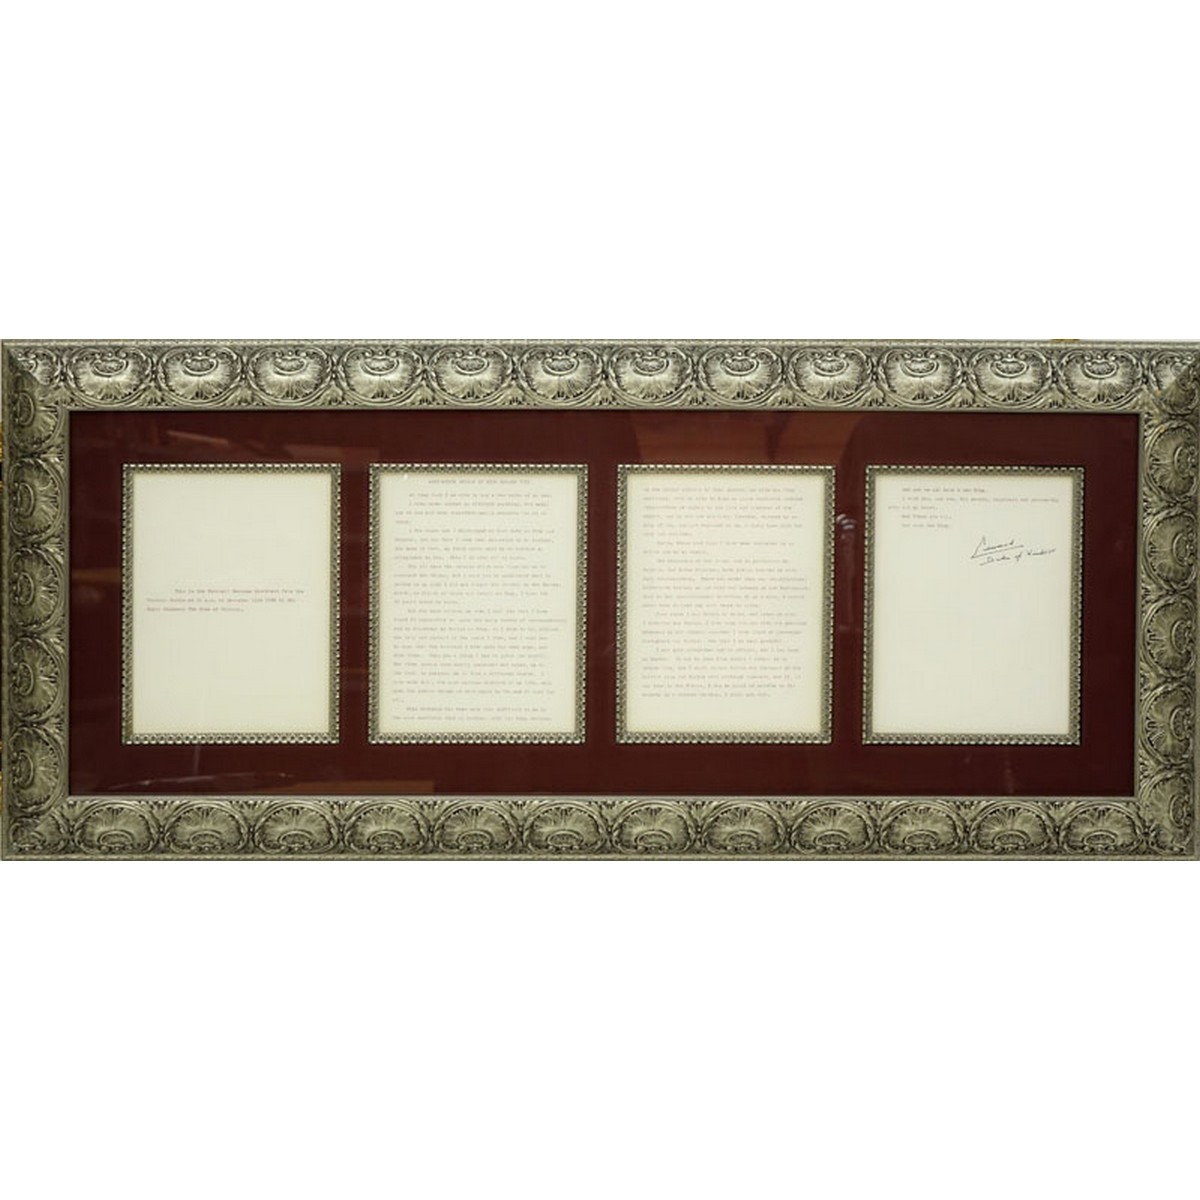 Signed King Edward VIII (Duke of Windsor) Farewell Broadcast Abdication Speech Dated December 11, 1936, Four (4) Page Letter is Now Mounted in a Shadowbox Frame.  Accompanied by the original Sotheby's Parke Bernet Auction Card from Sale Number 4421 Lot #1